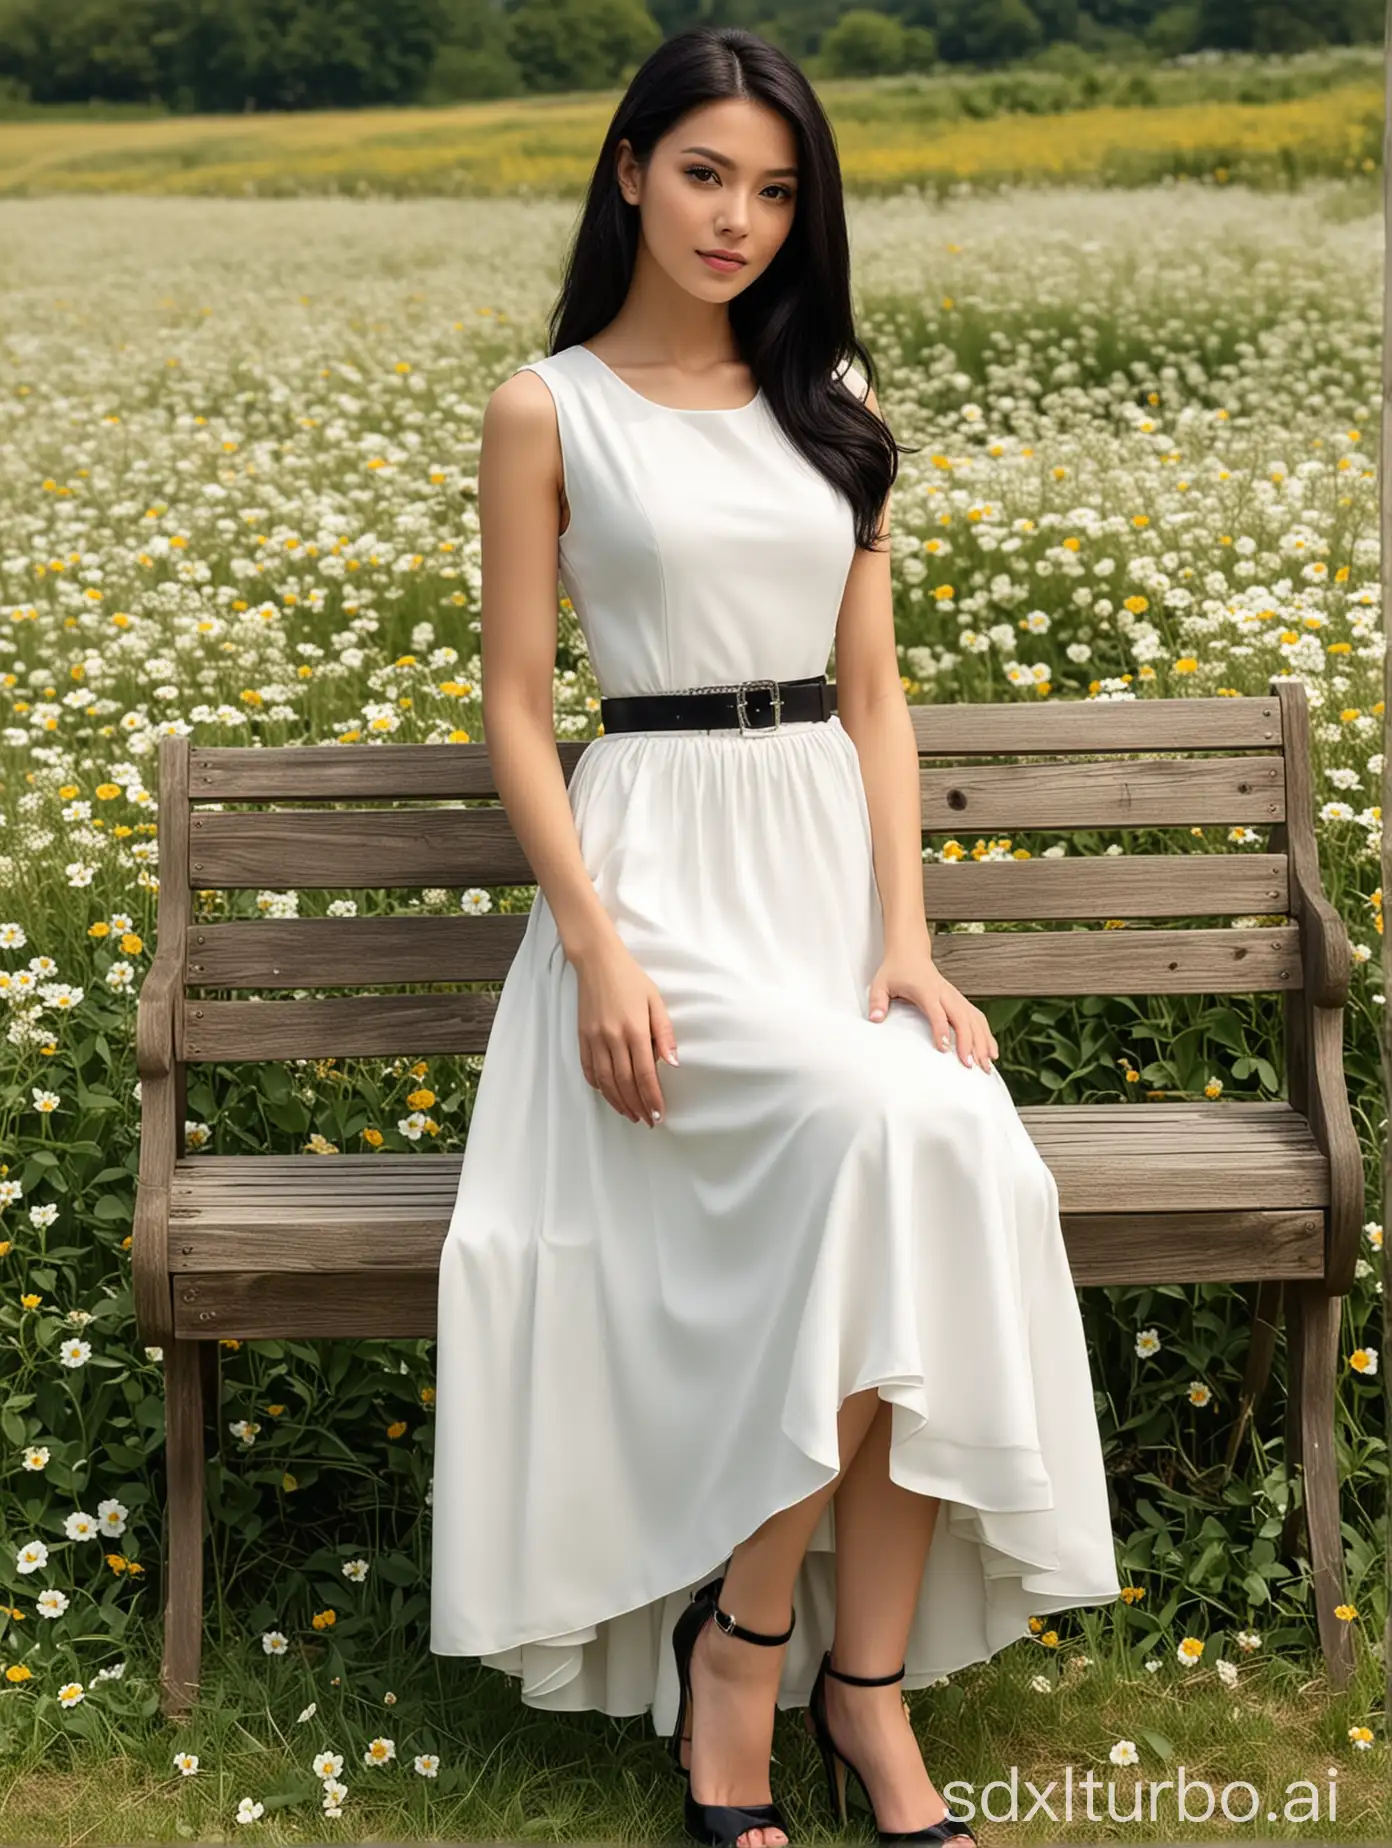 Character: A tall, slim young girl with black eyes and long black hair, wearing a stunning pure white long dress with no sleeves. The waist features two belts. The dress adopts a round neckline and sleeveless design, with a skirt hem extending to the ankles, highlighting the elegance of the attire. Dress details: Made of polyester fiber, capable of slimming the waist. Pose: Sitting at the room's table; Shoes: Matched with delicately designed peep-toe high heels, complementing the dress's style. Background: In a field full of blooming flowers